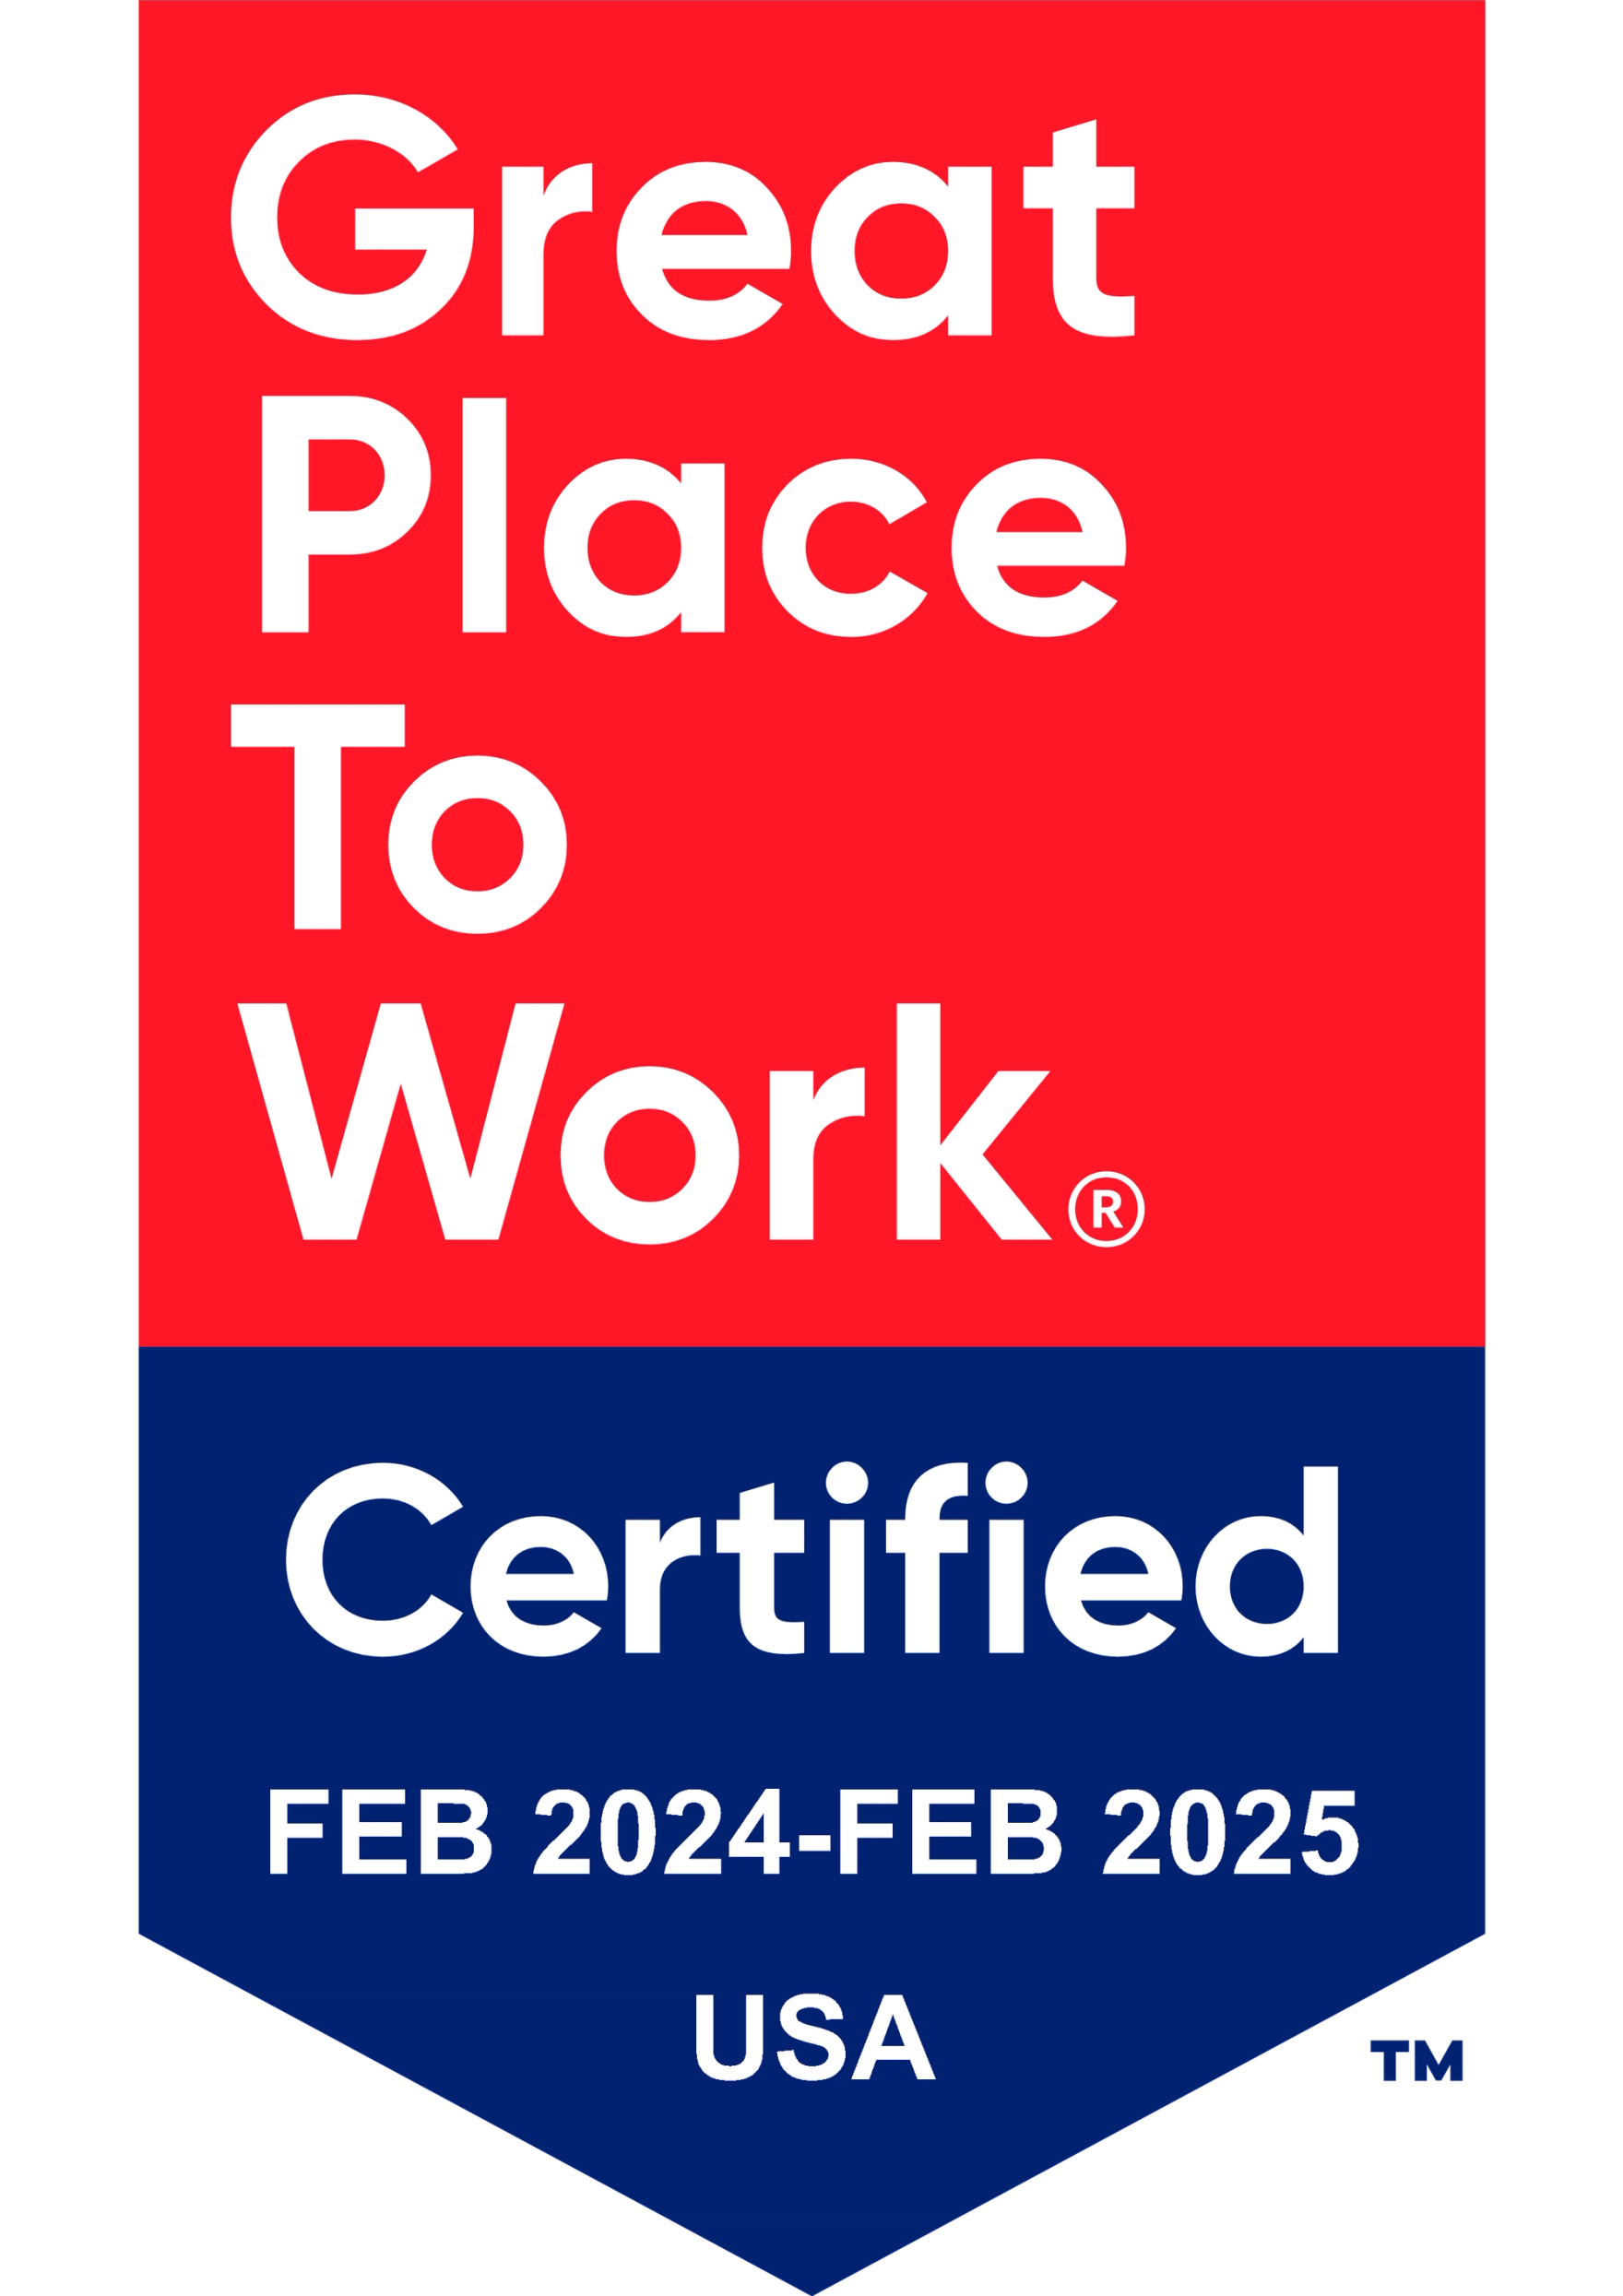 Great Place to Work badge February 2024-February 2025